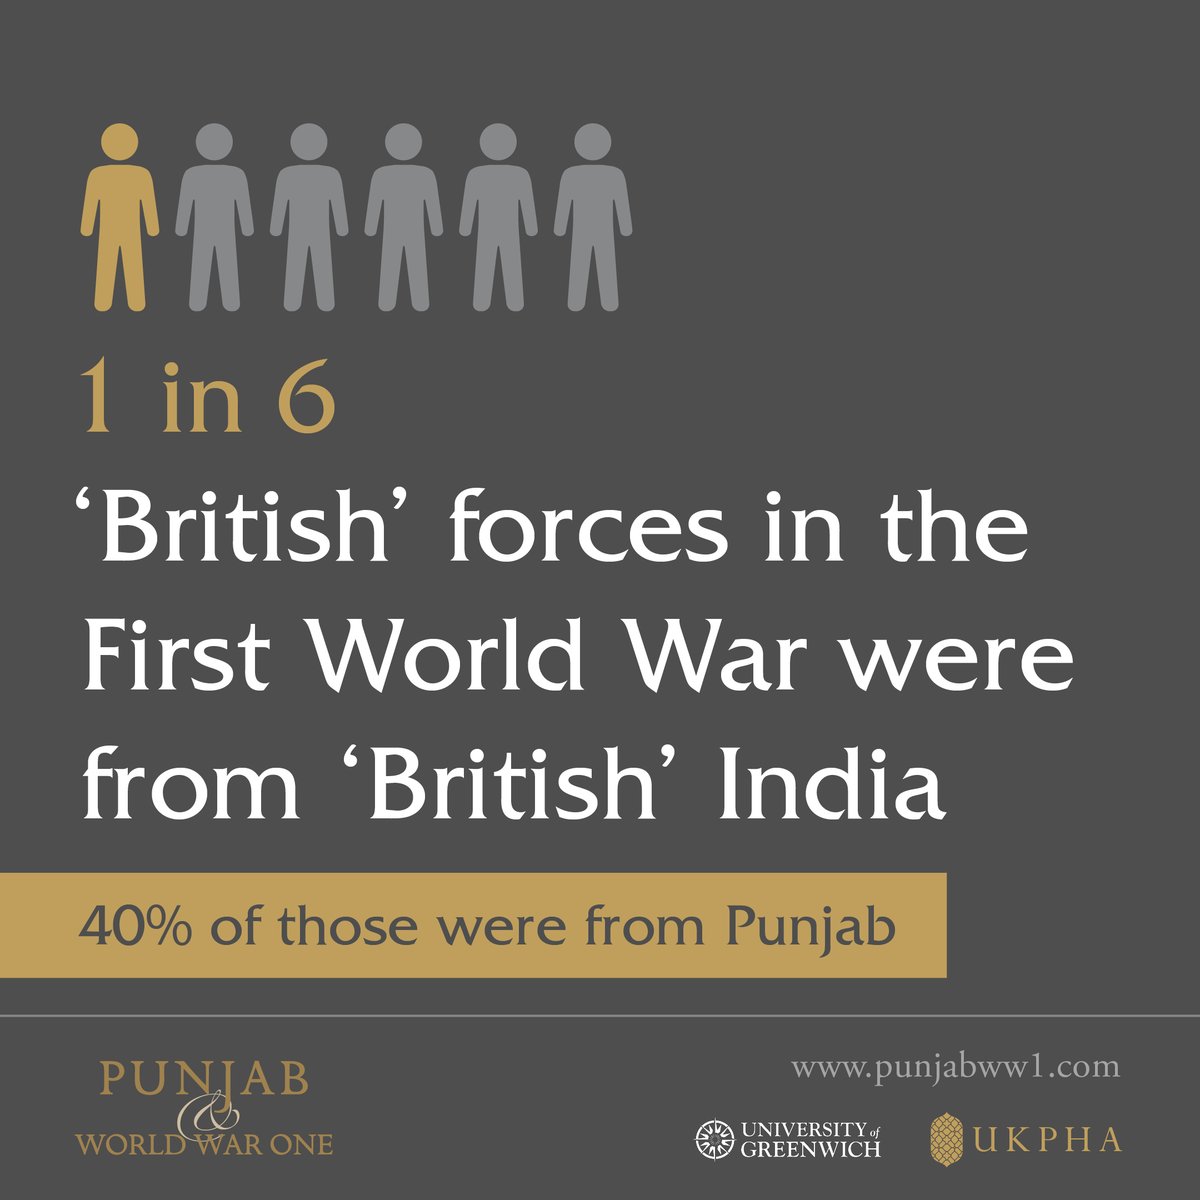 We’re recruiting! Applications are now open for two, fully-funded PhD scholarships to explore the #PunjabRegisters - a unique archive containing the service histories of c. 320,000 Punjabis who served in the First World War... 1/10.